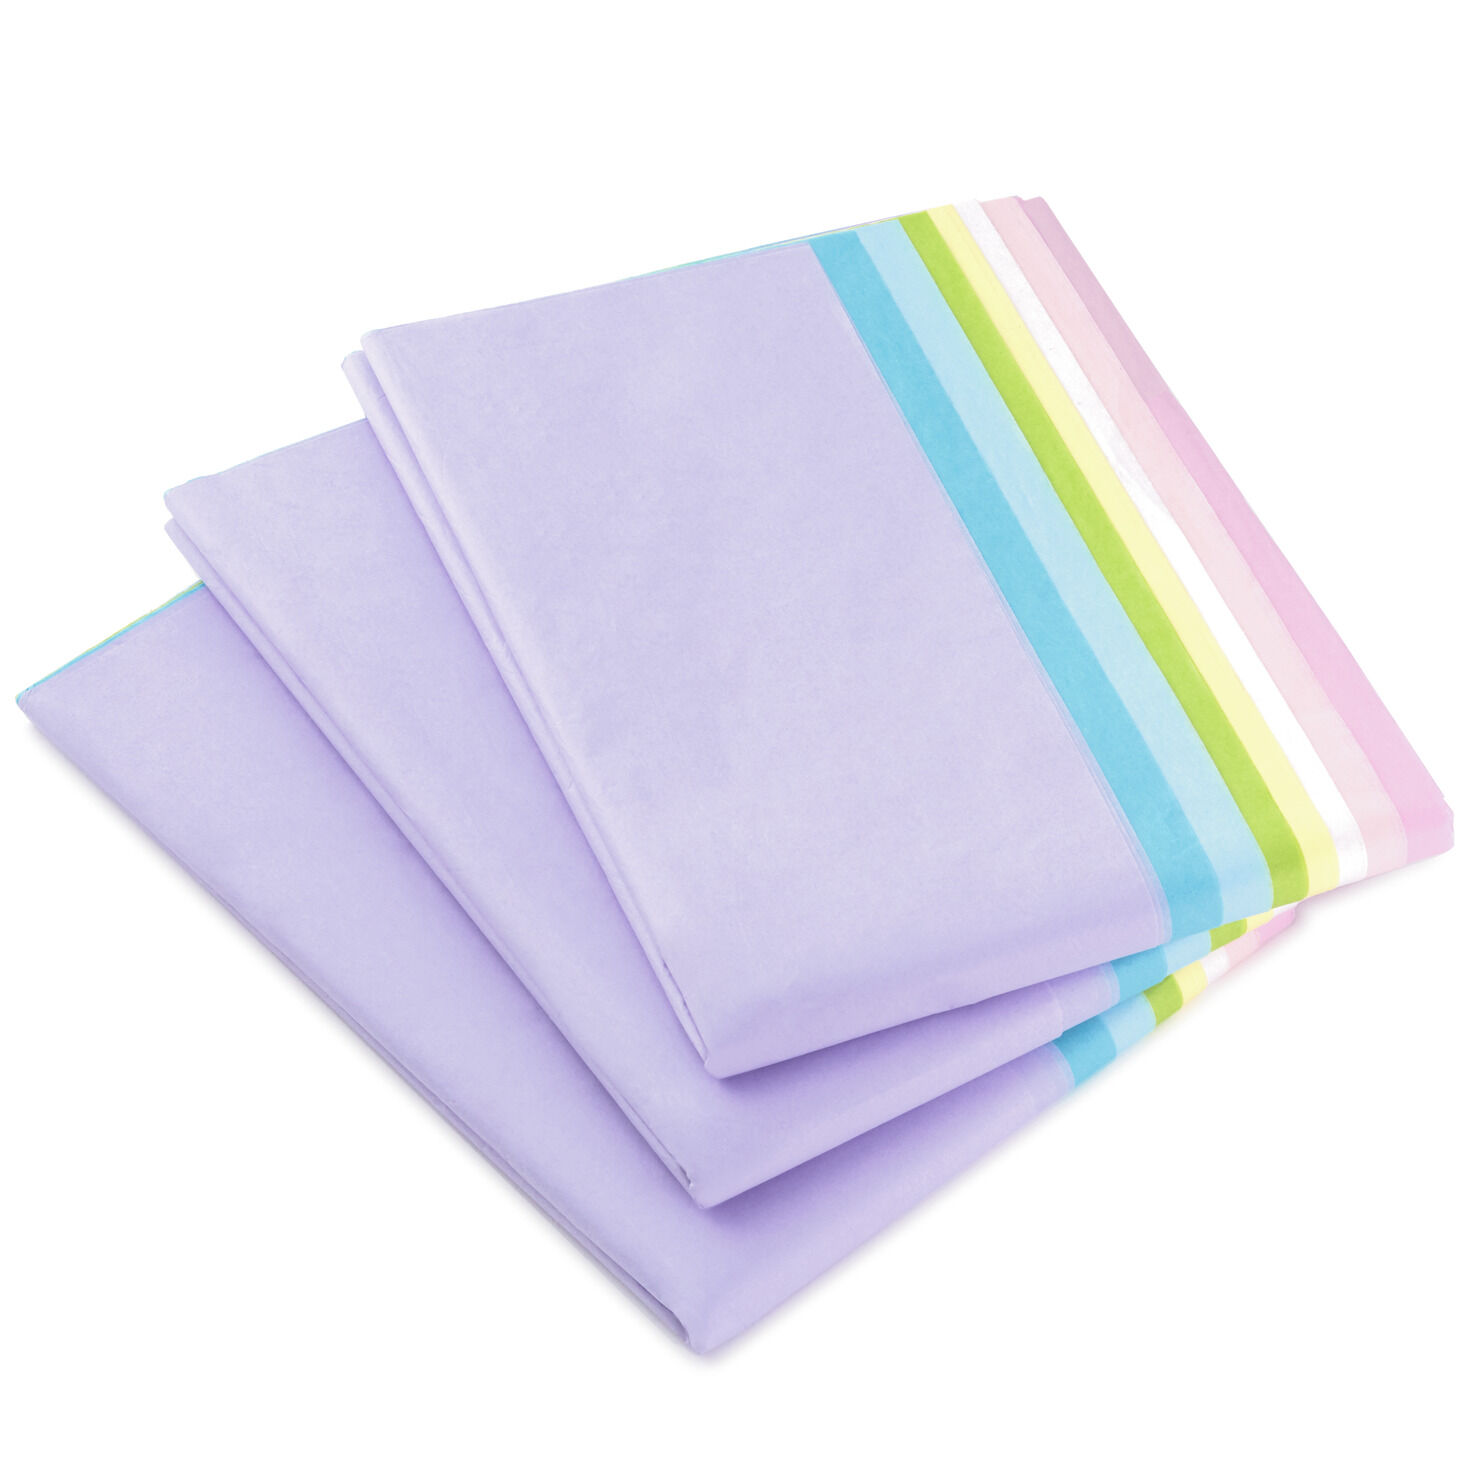 120 Sheets Pastel Tissue Paper for Gift Wrapping Bags, Bulk Set